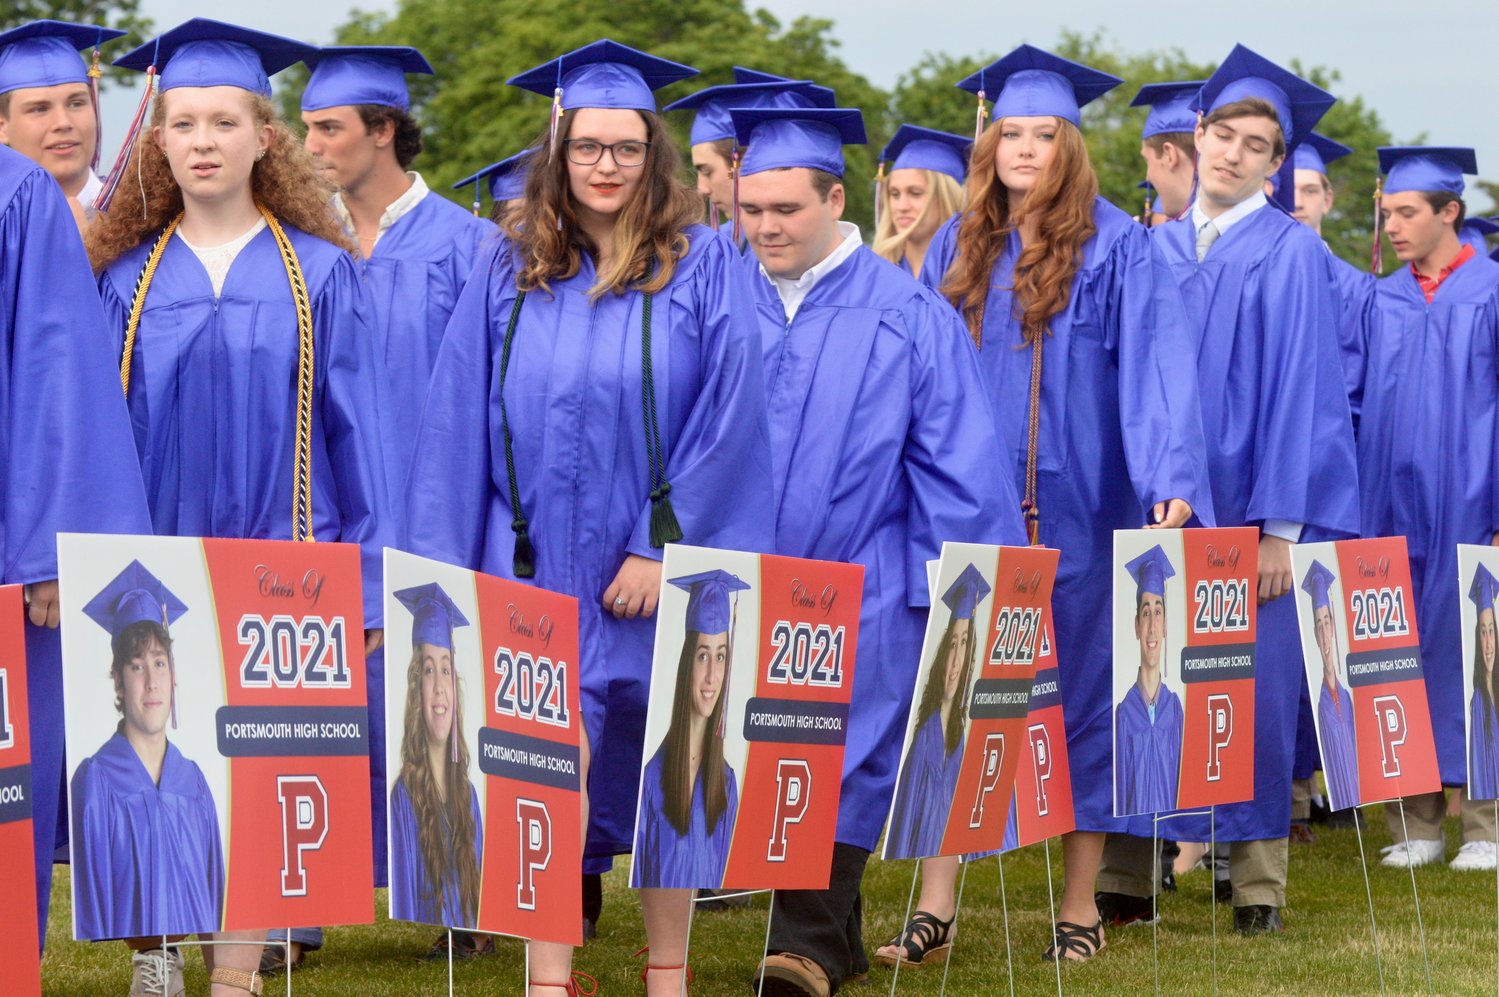 Graduating seniors marched to the baseball field between individual signs that were made up for each student to take home.